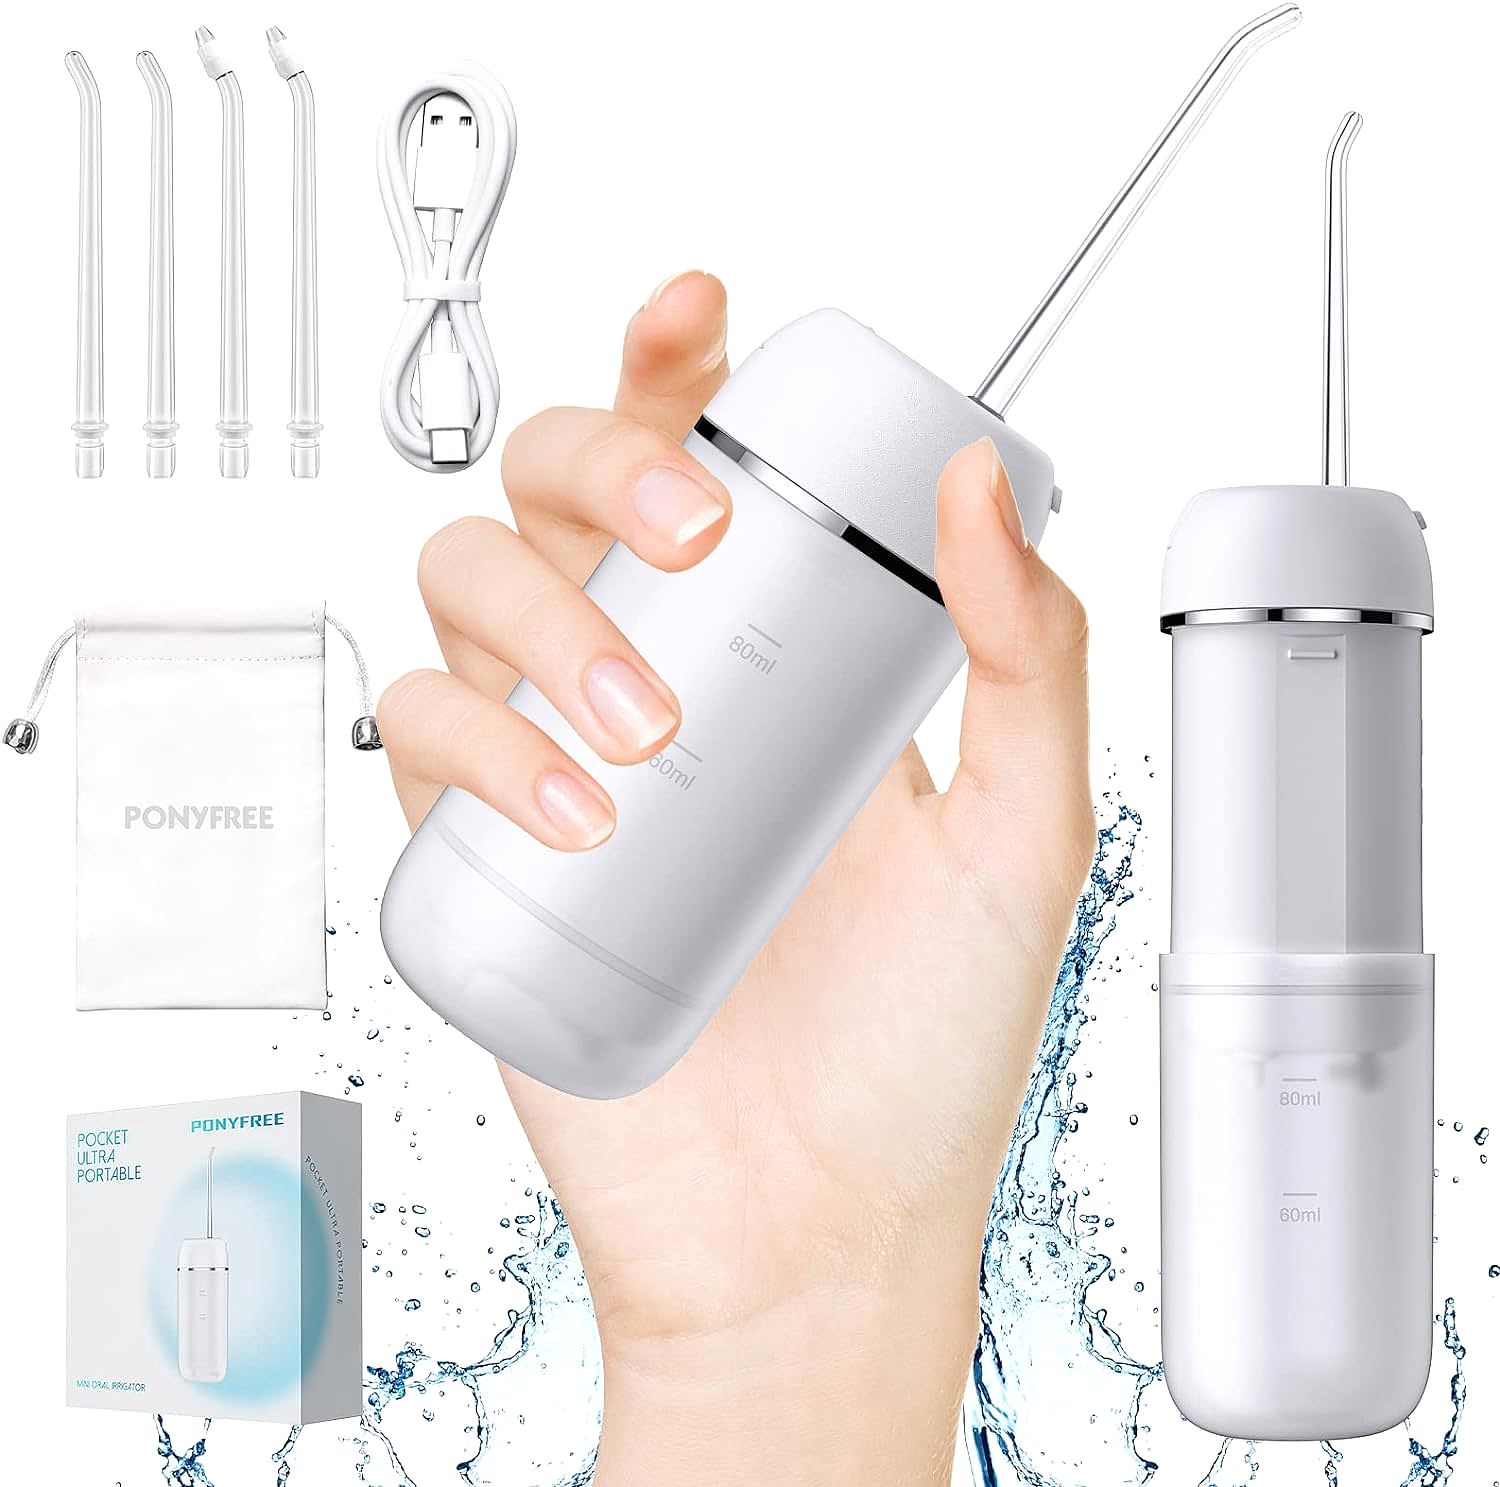 PONYFREE CWF-C2 Cordless Water Flosser: The Perfect Portable Oral Hygiene Companion